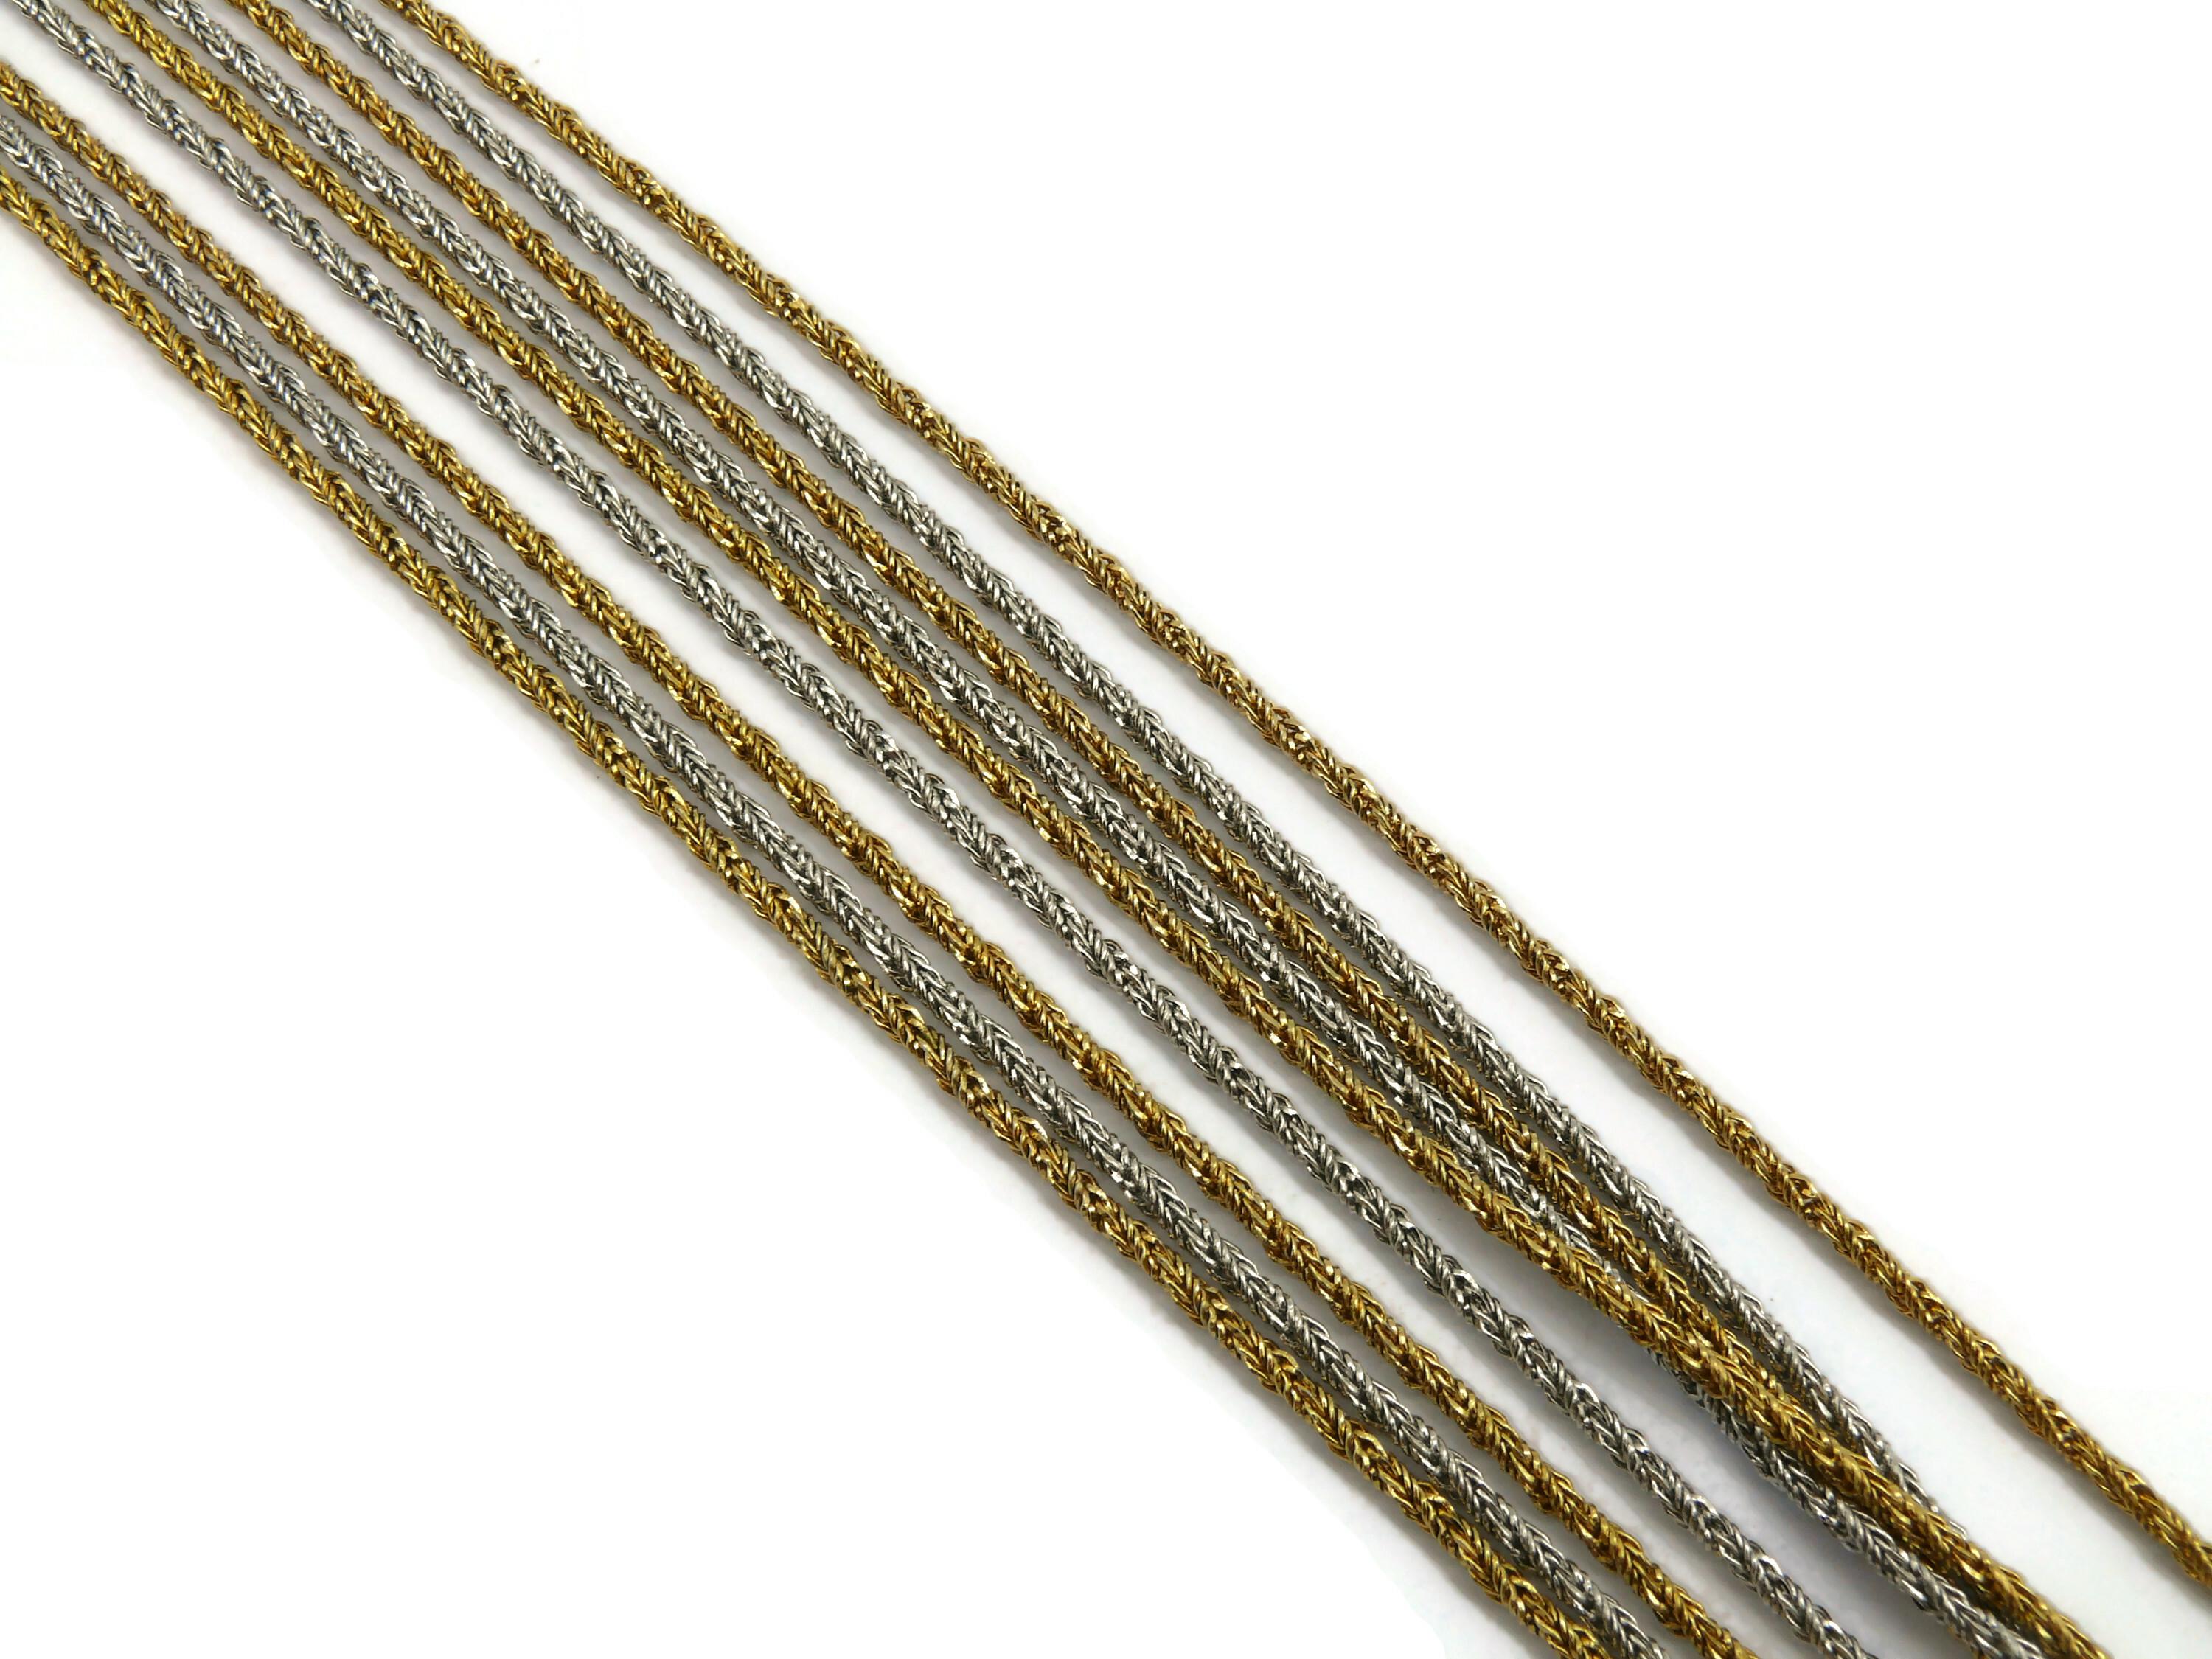 Women's CHRISTIAN DIOR Vintage Nine Strand Two Tone Chain Necklace, 1973